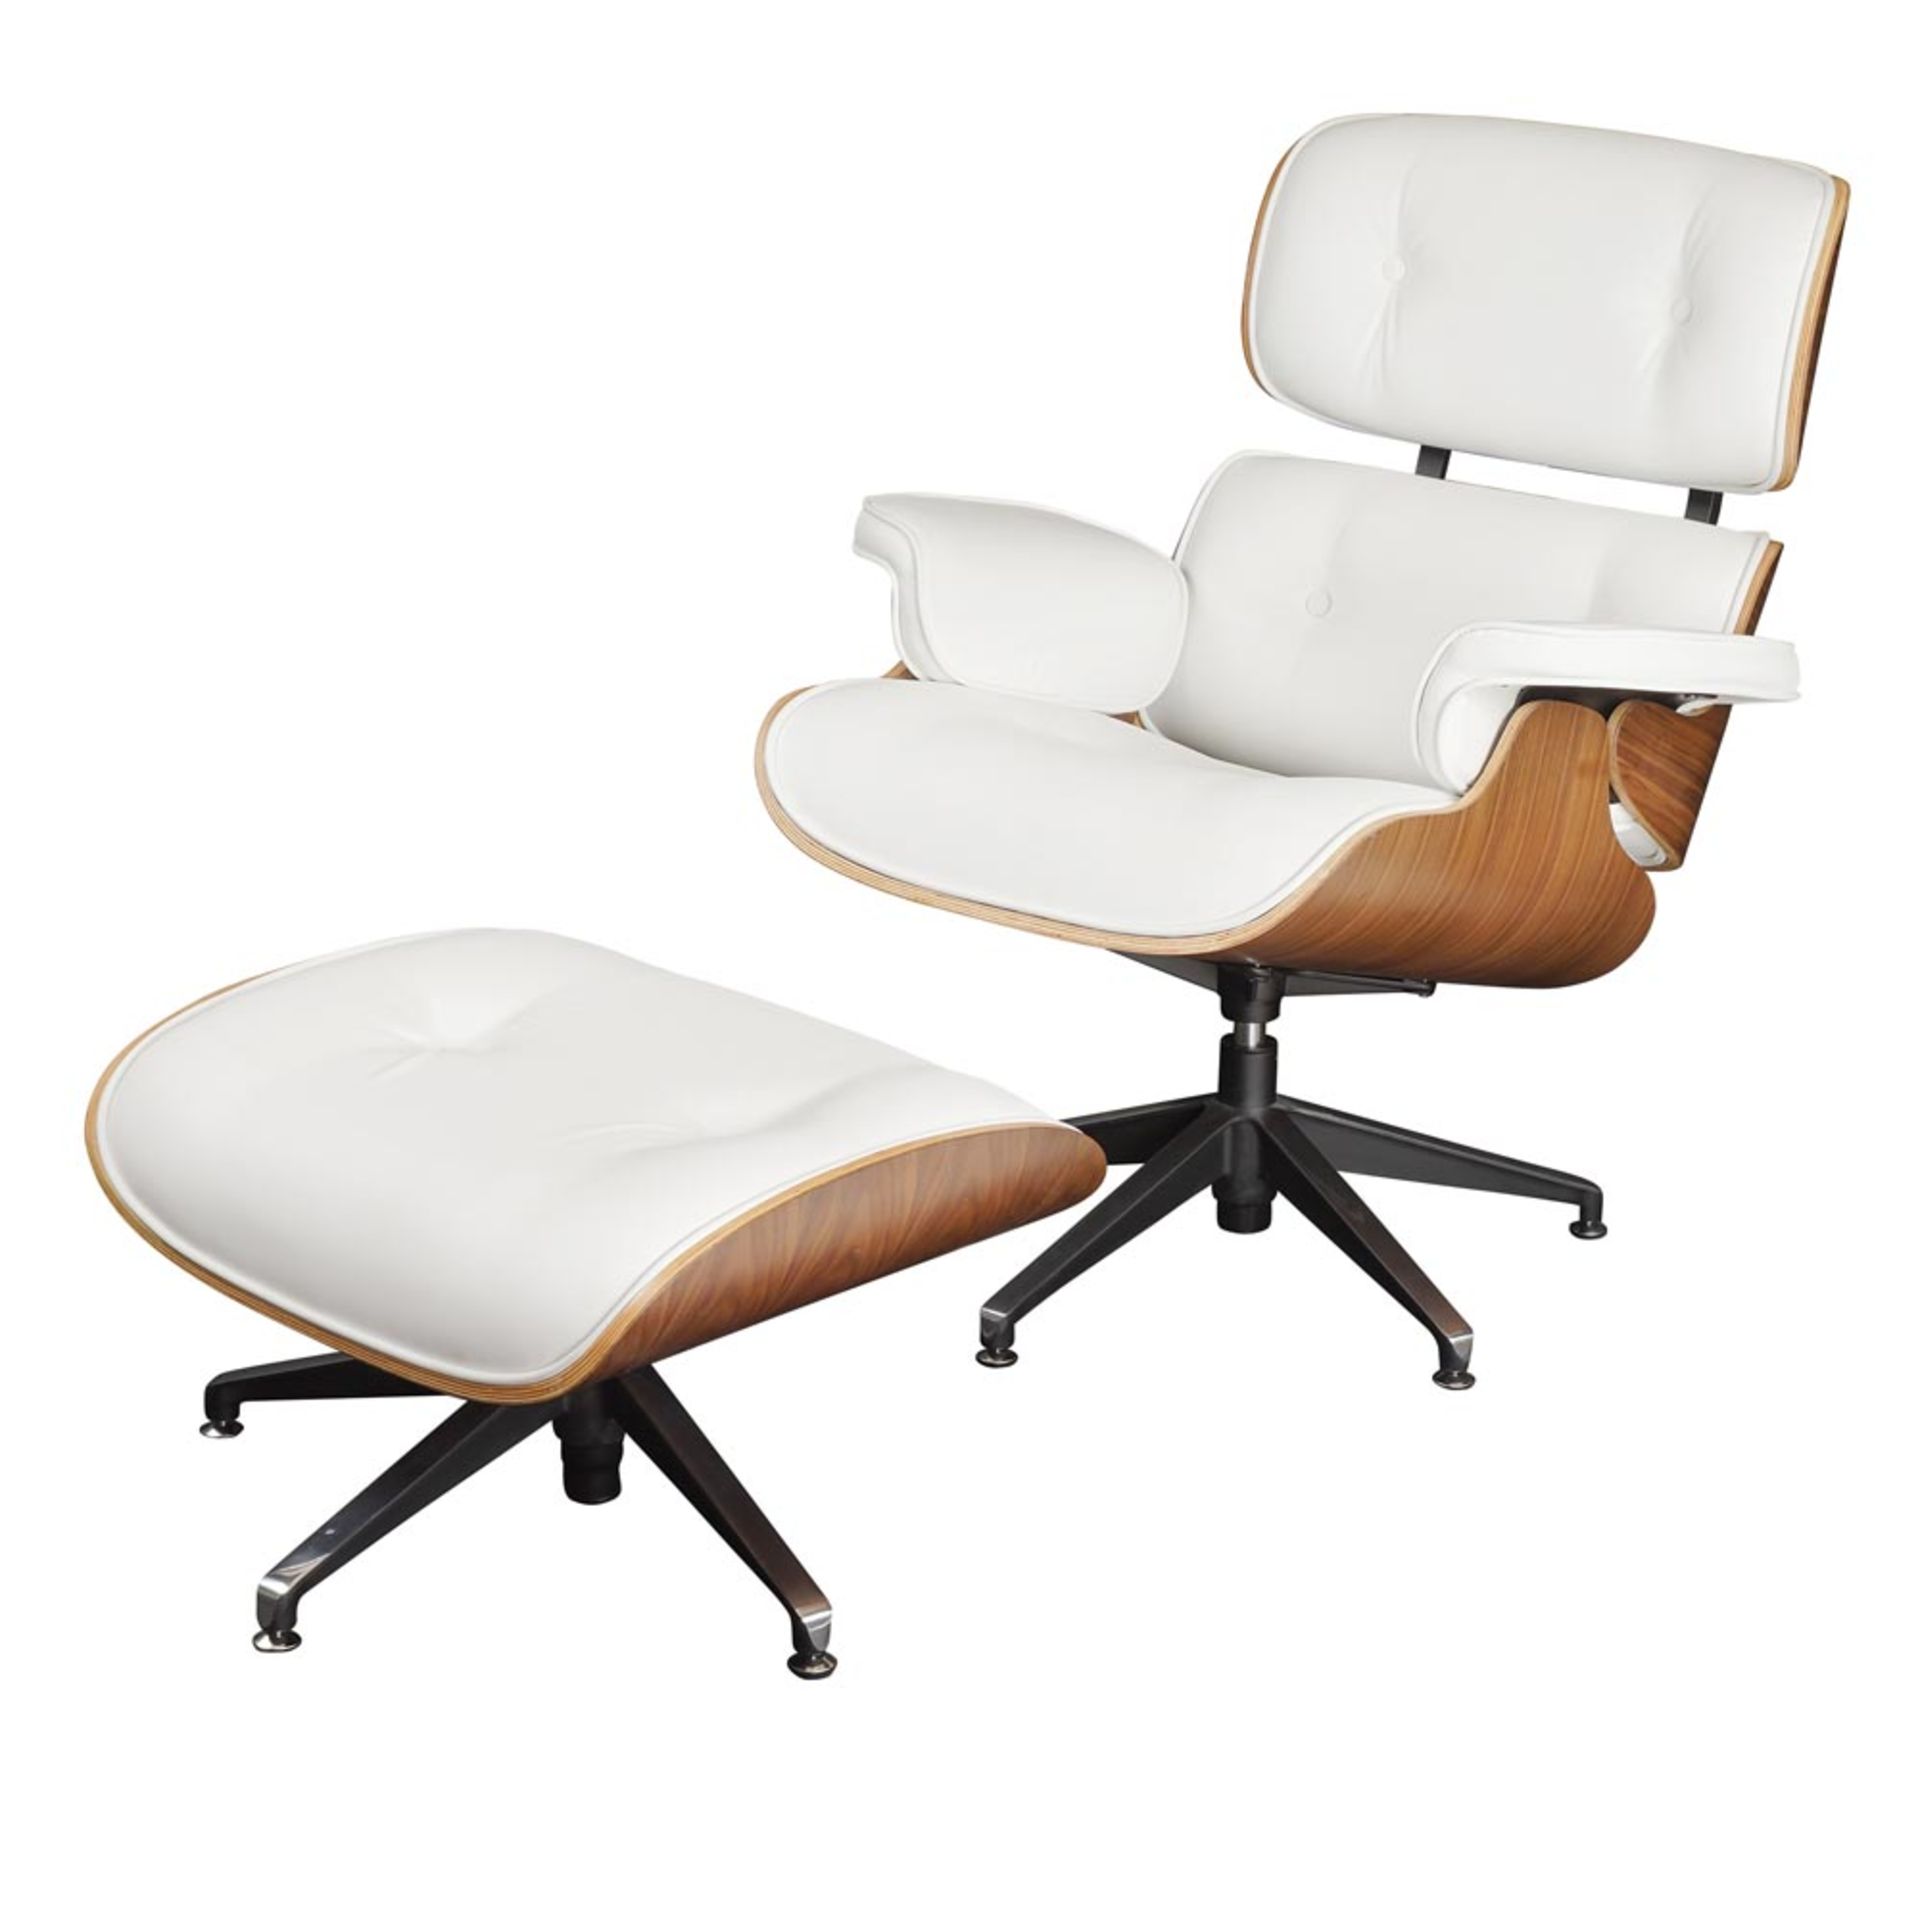 Lounge Chair armchair, copy from Charles Eames 20th century (poltrona) 93x72x83 cm.